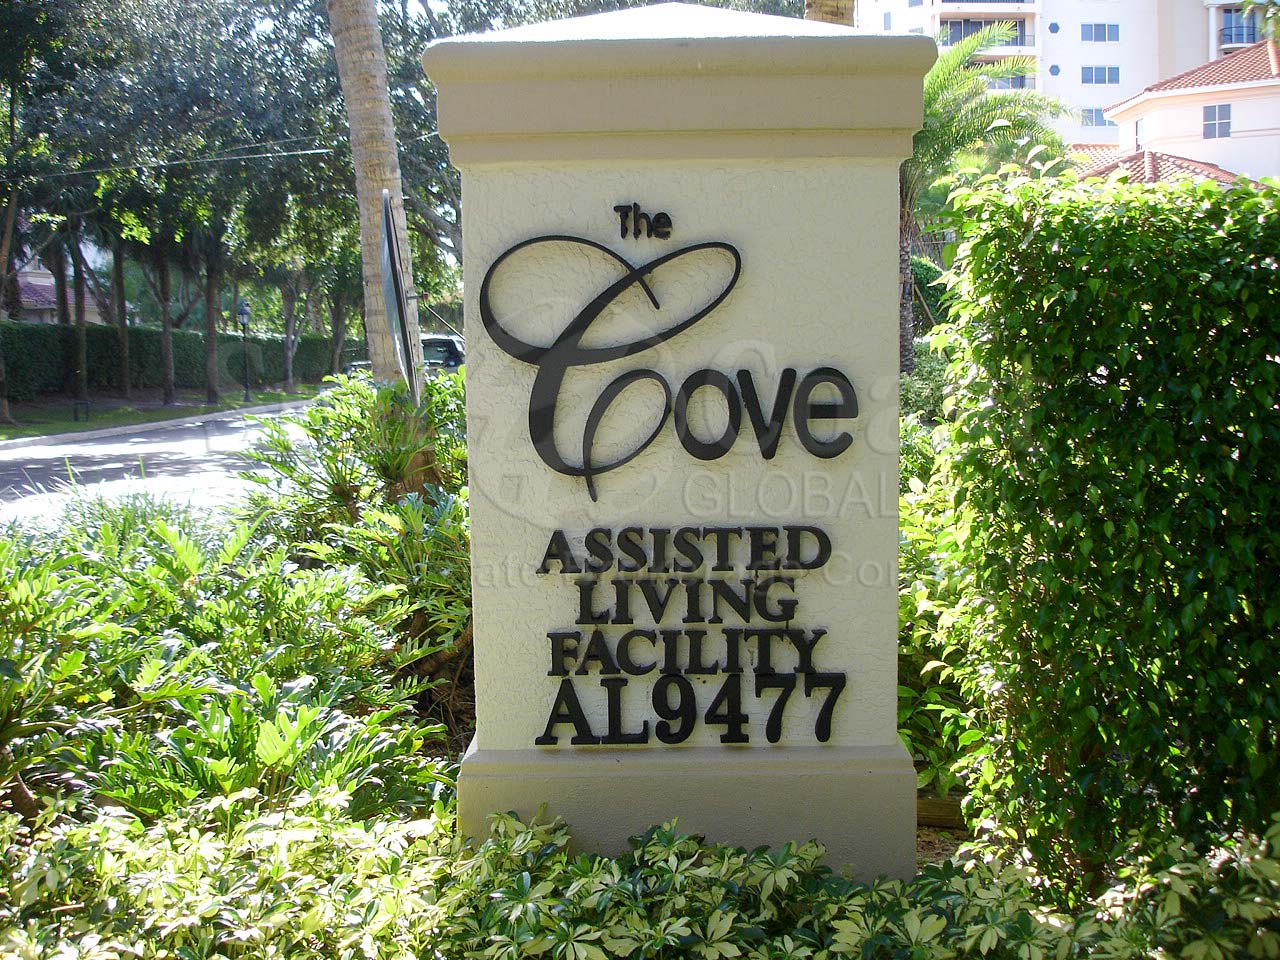 The Cove - Assisted Living Facility